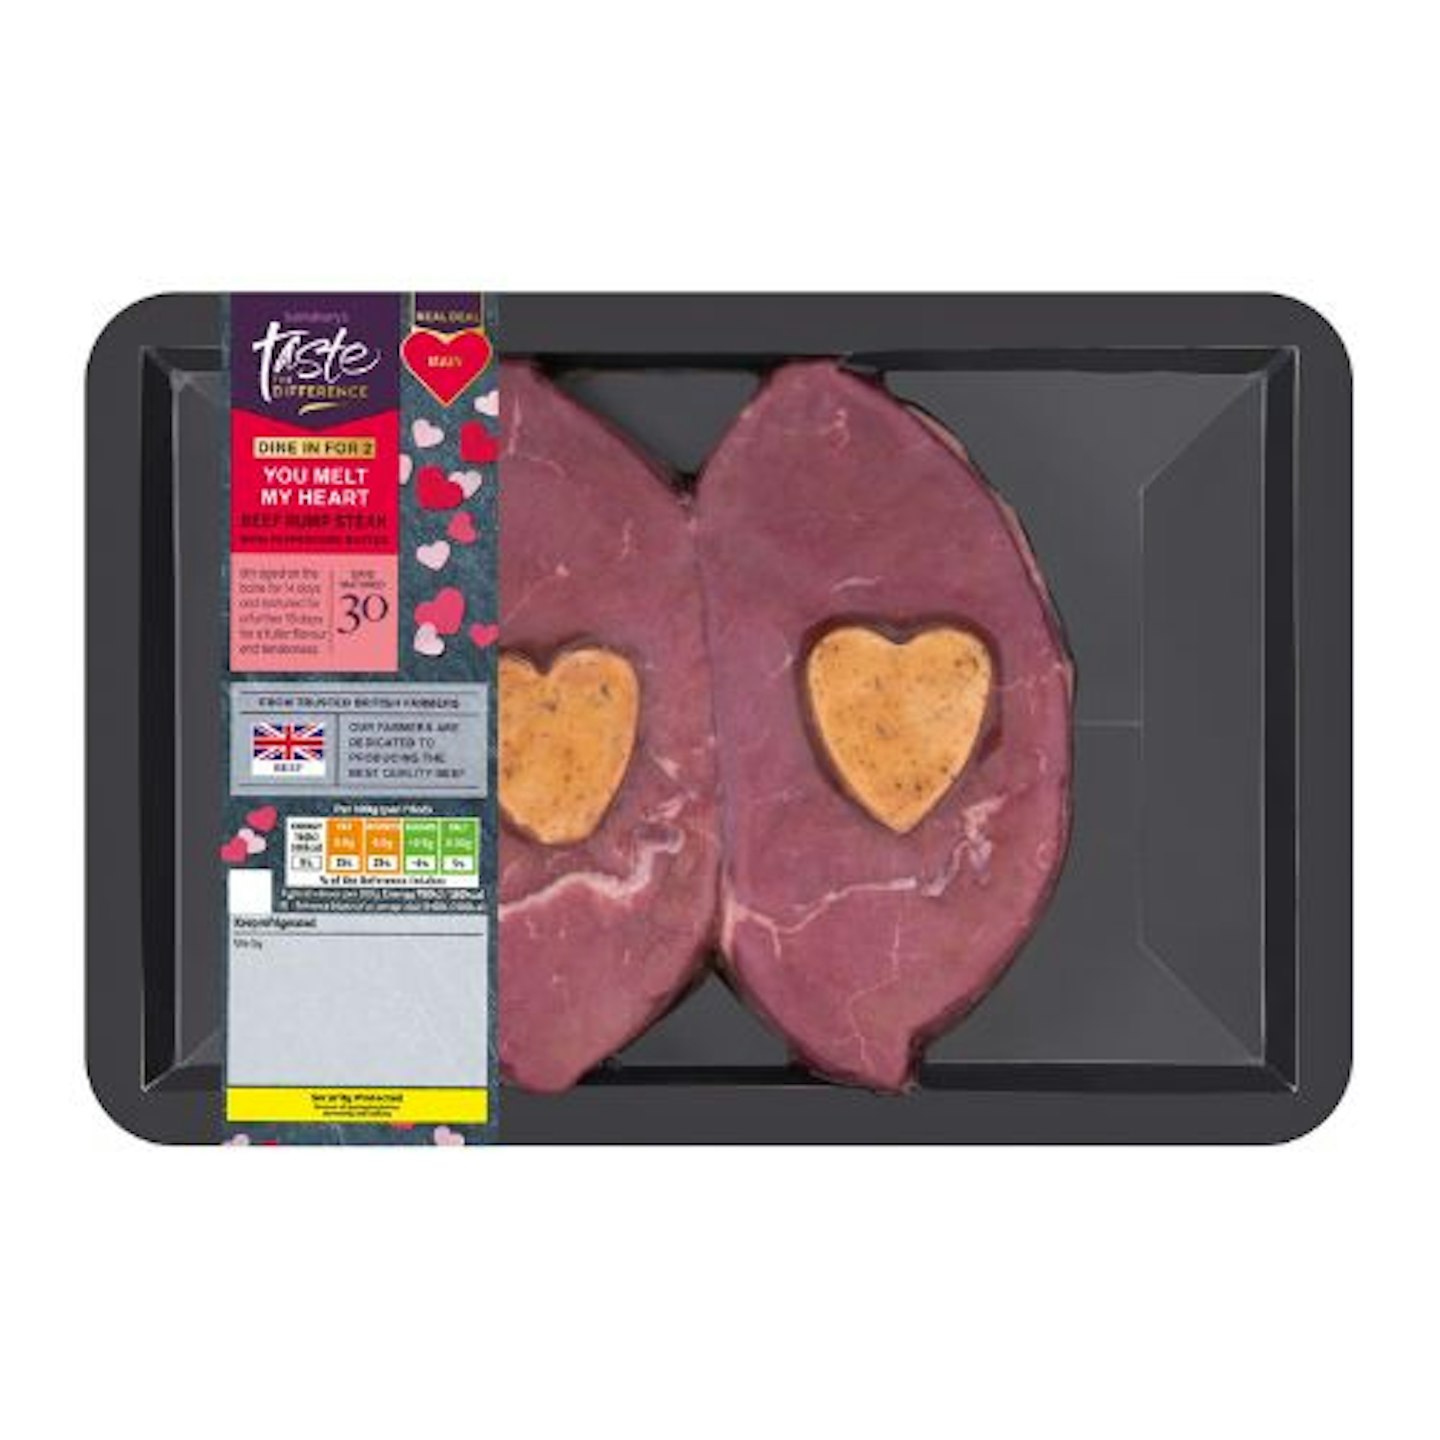 Sainsbury's 30 Day Matured Dry Aged British Rump Steak with Peppercorn Butter, Taste the Difference 390g